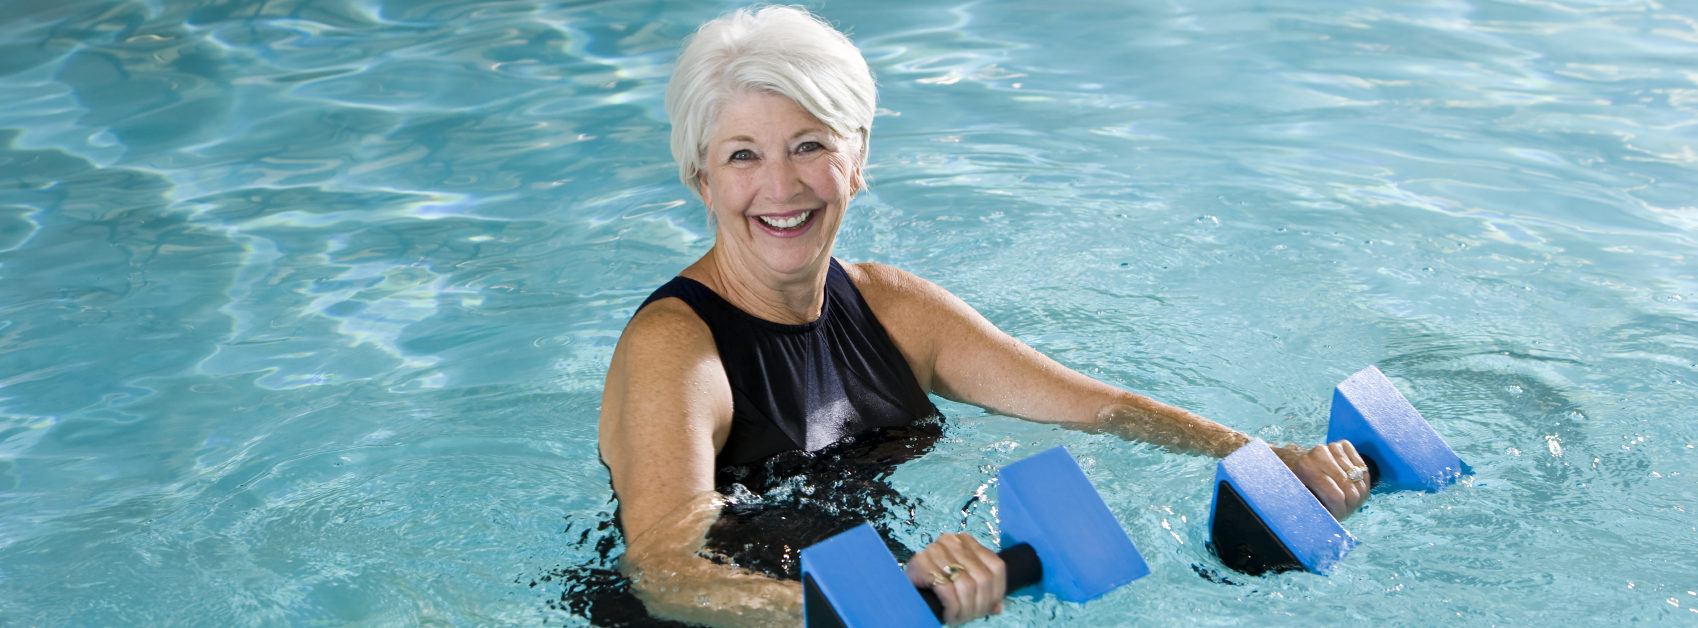 A senior lady is happily doing water exercise